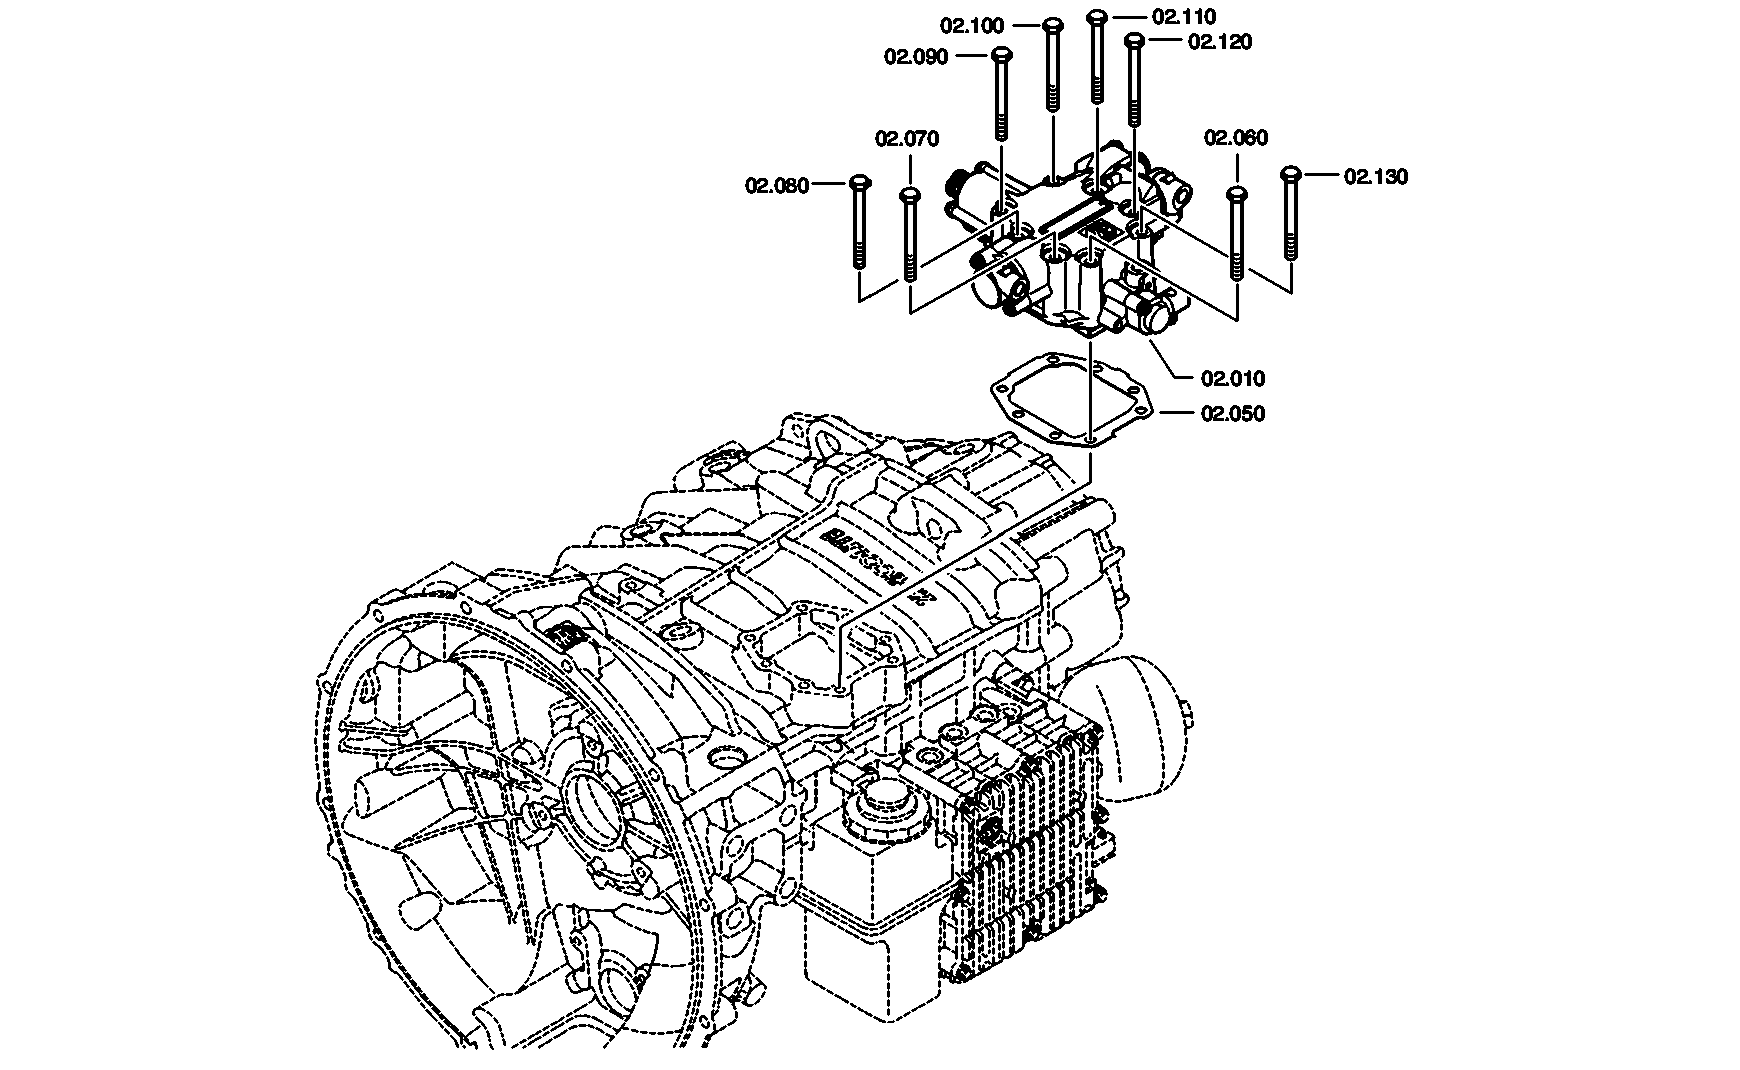 drawing for DAF 1821349 - TRANSMISSION ACTUATOR (figure 1)